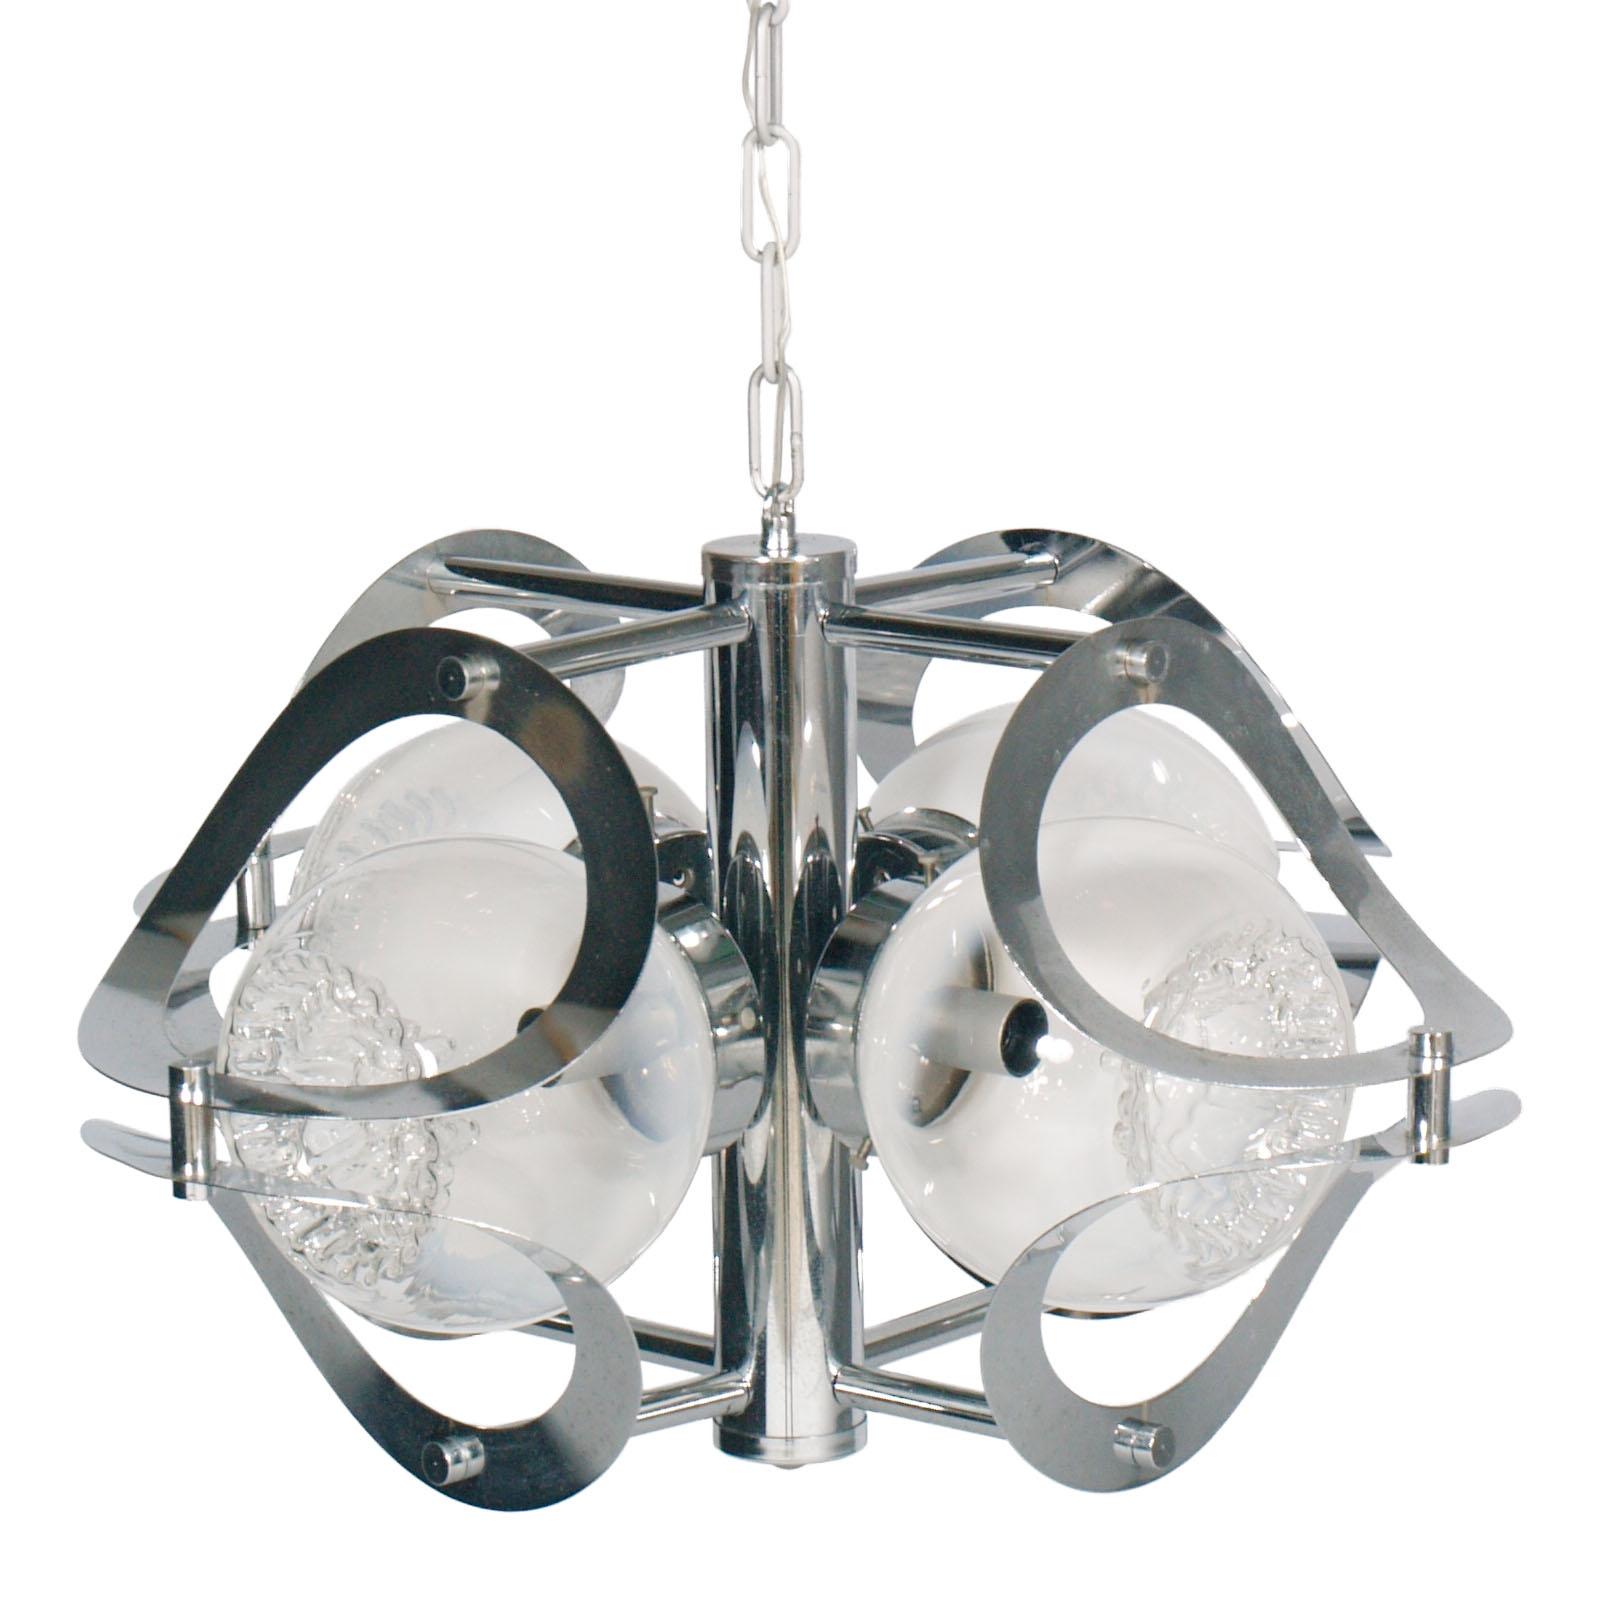 1970s chandelier by Mazzega Murano in chromed steel and Murano glass, 4-light, with overhauled electrical system

Measures cm: Height 90/32, diameter 48 

Mazzega Murano is famous for their gorgeous glass lamps, each handcrafted, as well as